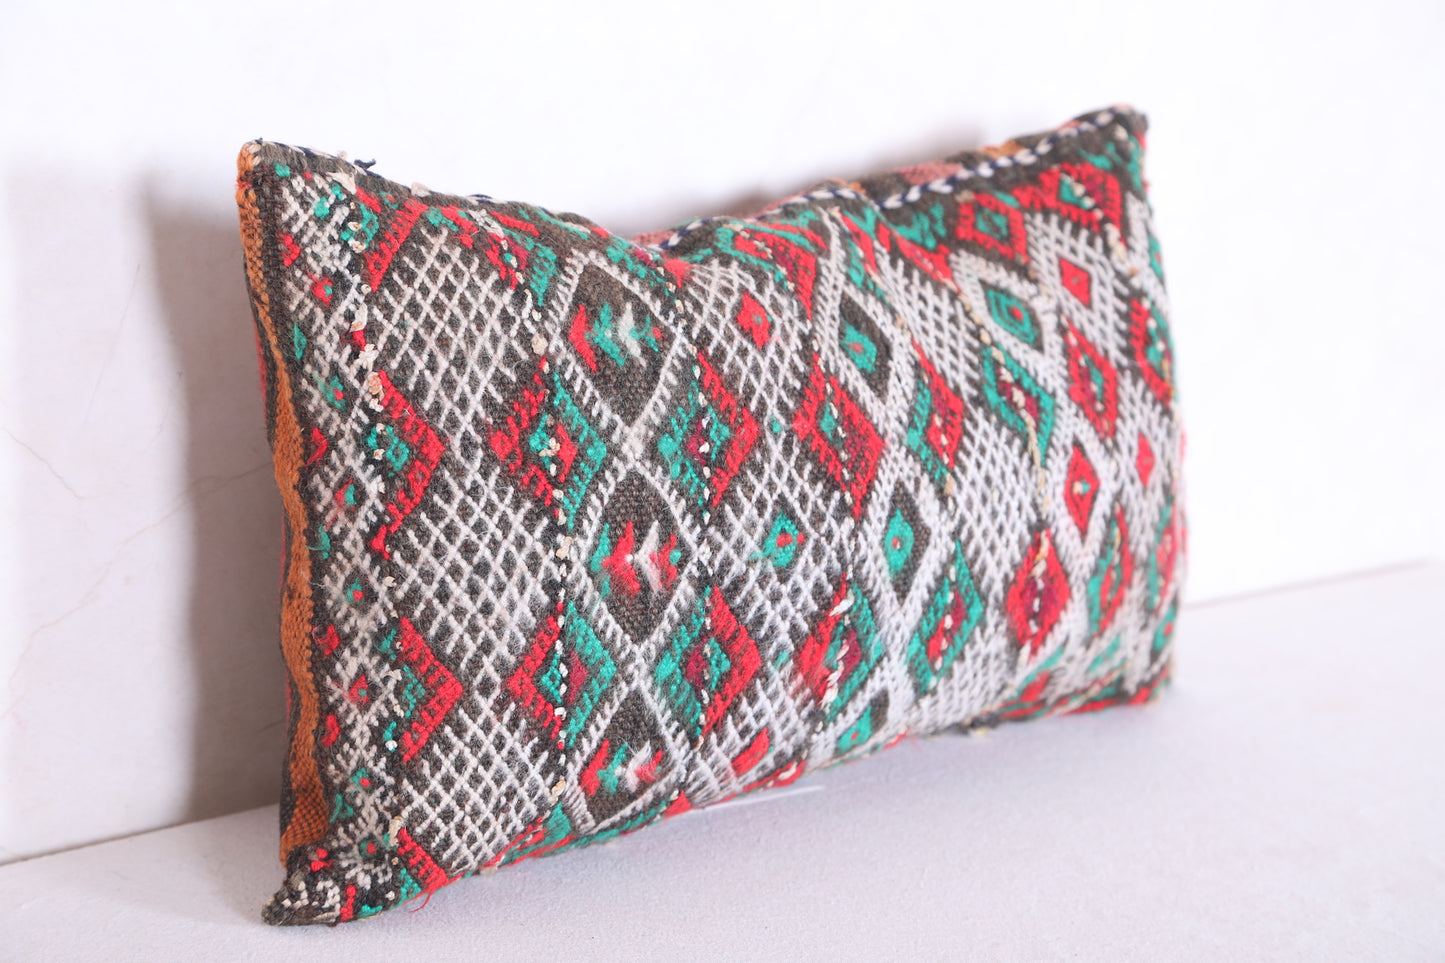 Moroccan handmade kilim pillow 11.4 INCHES X 19.2 INCHES